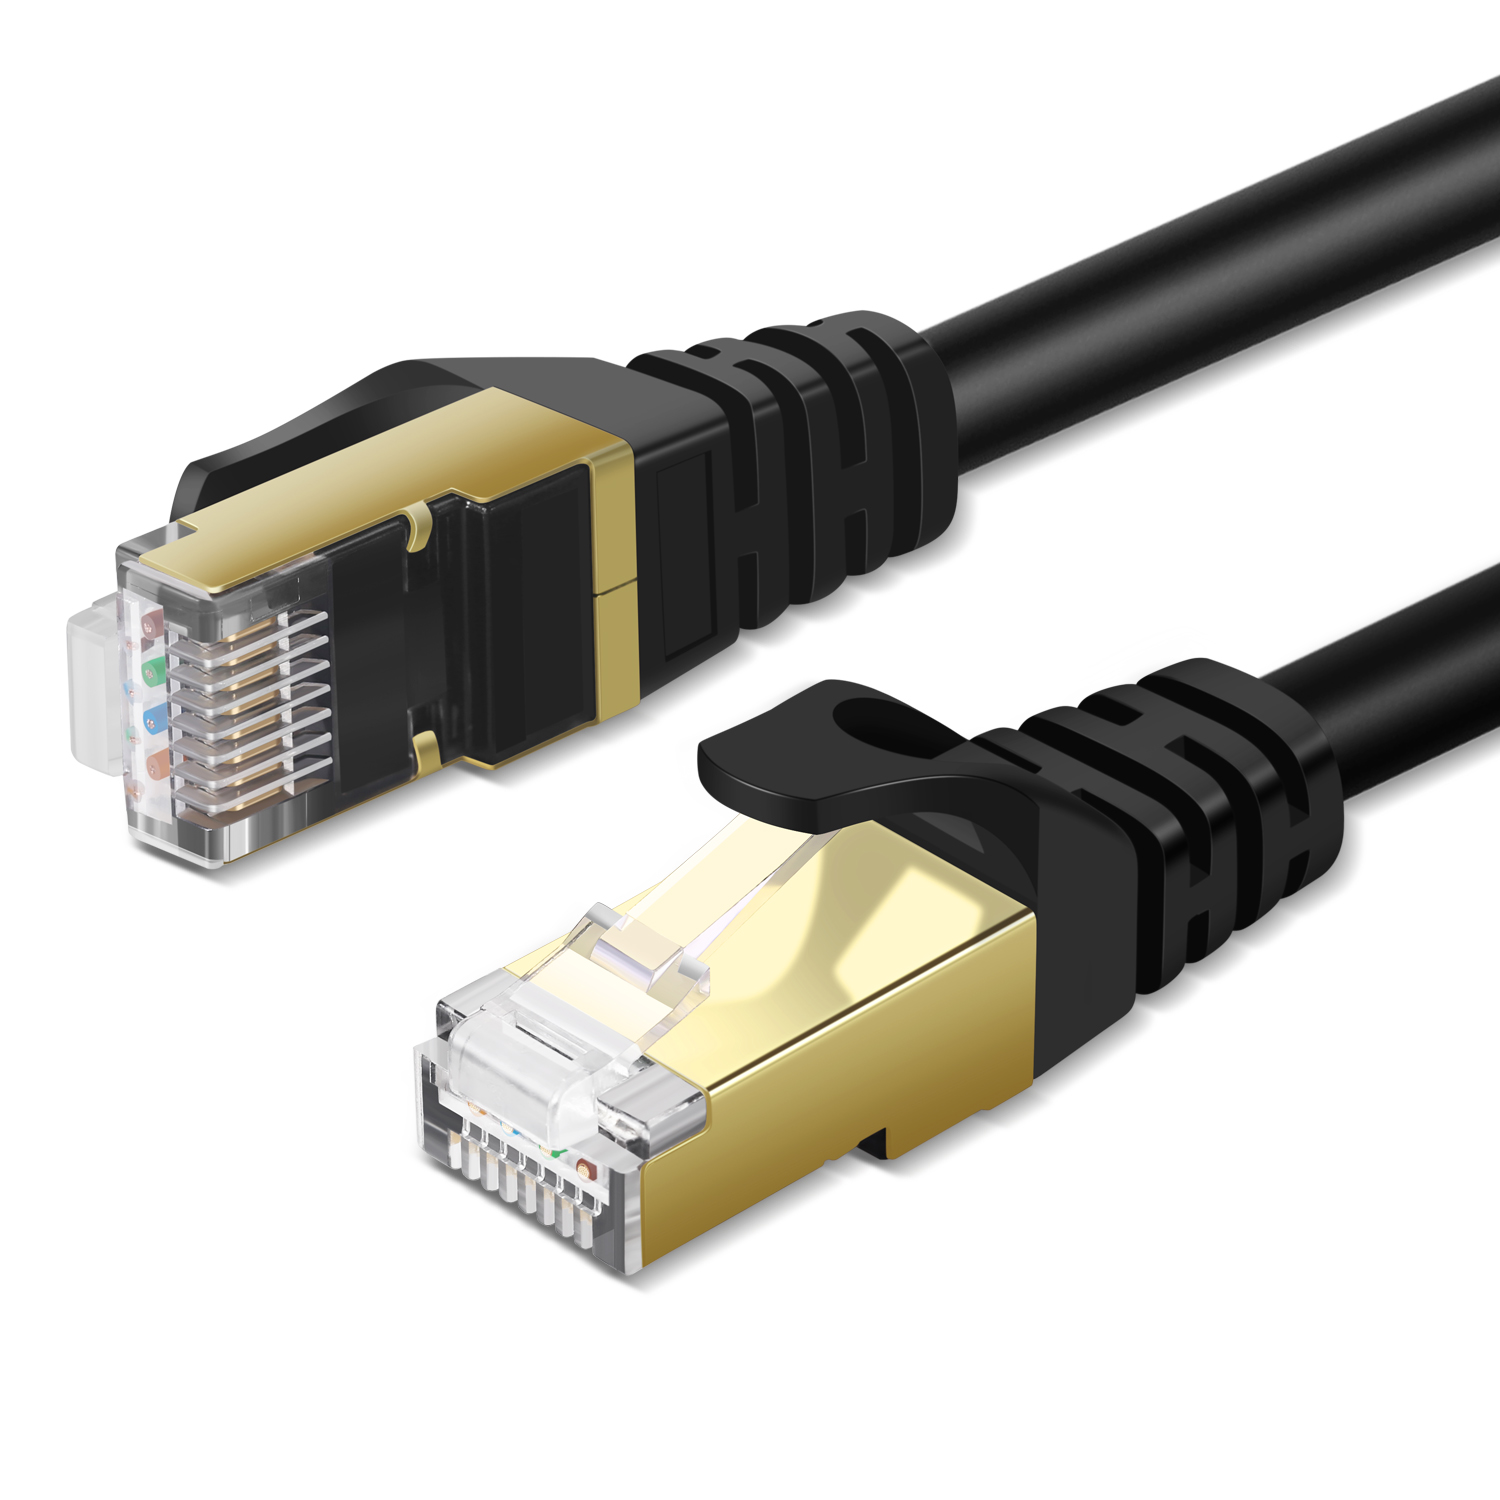 High Performance Category 7 RJ45 8P8C Ethernet Lan Cable - CAT 7 ethernet cable for gaming and high demand applications provides universal connectivity for LAN network cables components such as PCs, computer servers, printers, routers, switch boxes, network media players, NAS, VoIP phones, PoE devices, and more